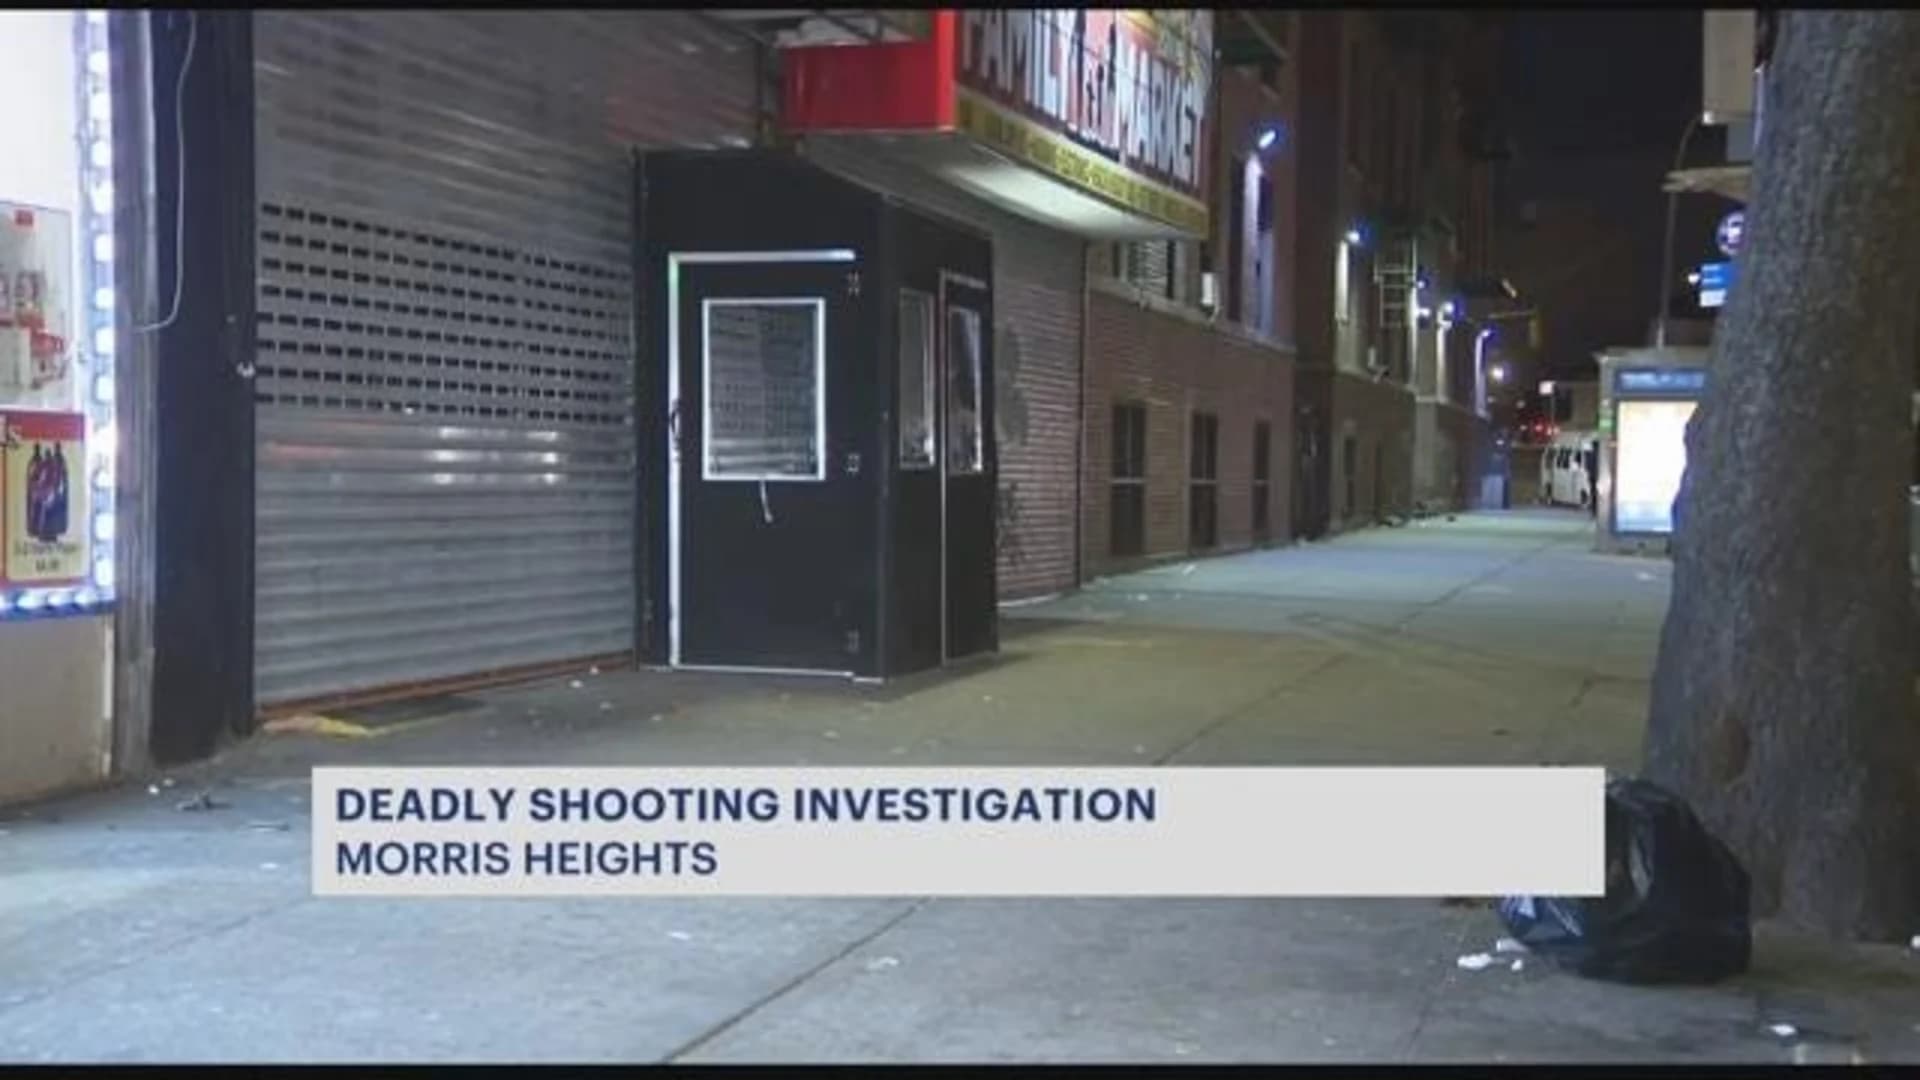 Police: 25-year-old man fatally shot in Morris Heights